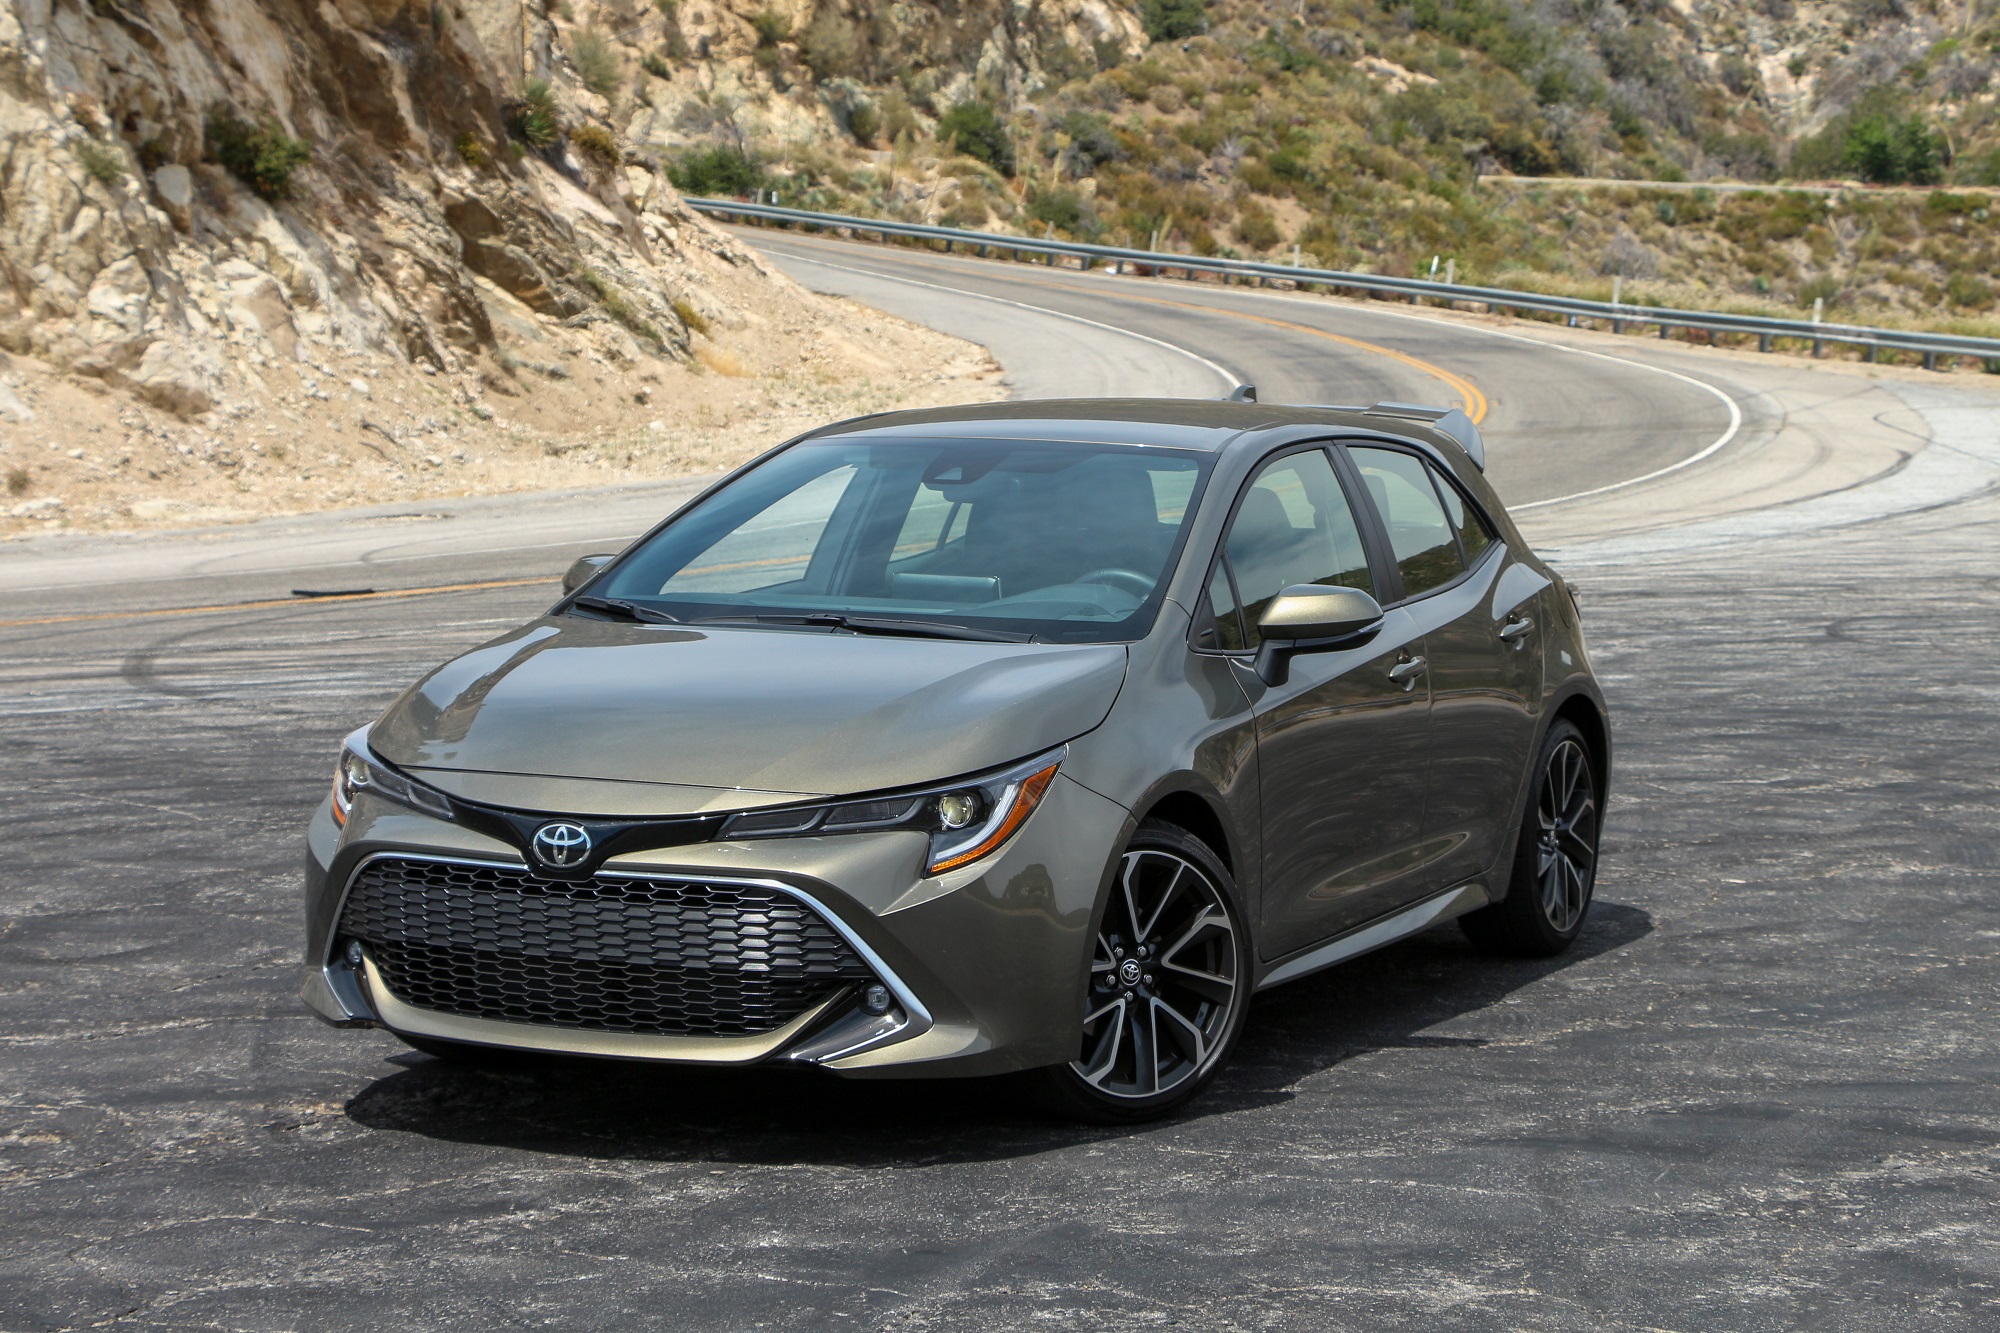 2019 Toyota Corolla Hatchback Review Bringing Fun To The